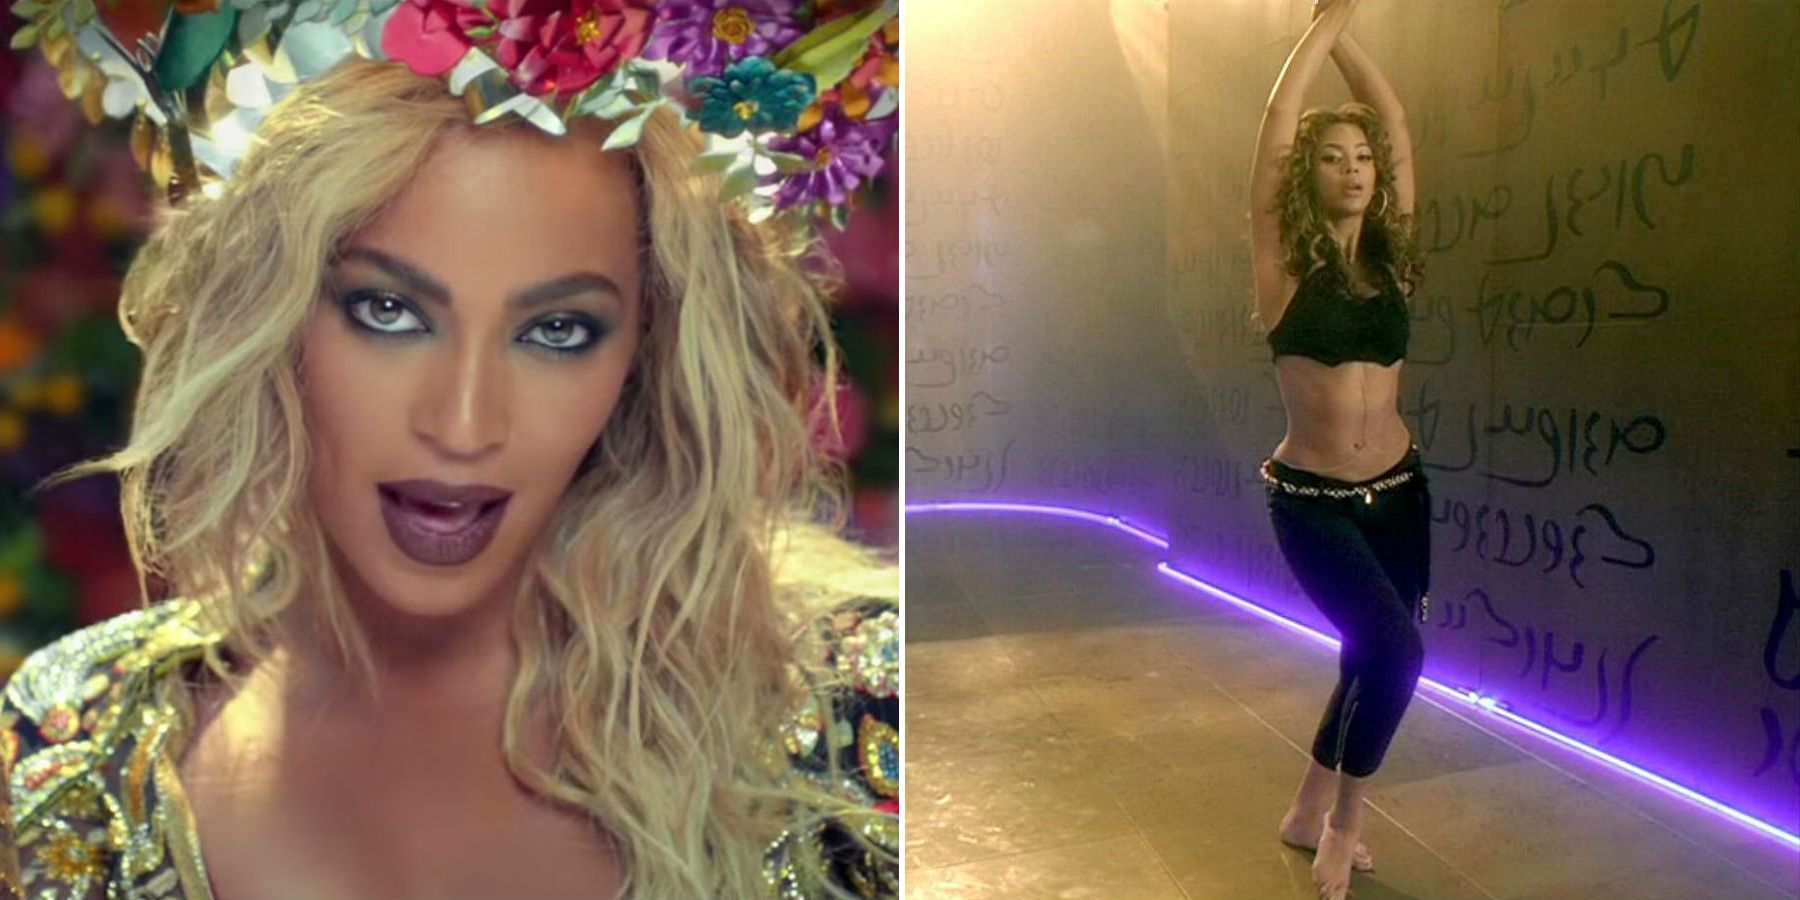 The 10 Best Beyoncé Songs (According To YouTube Views)